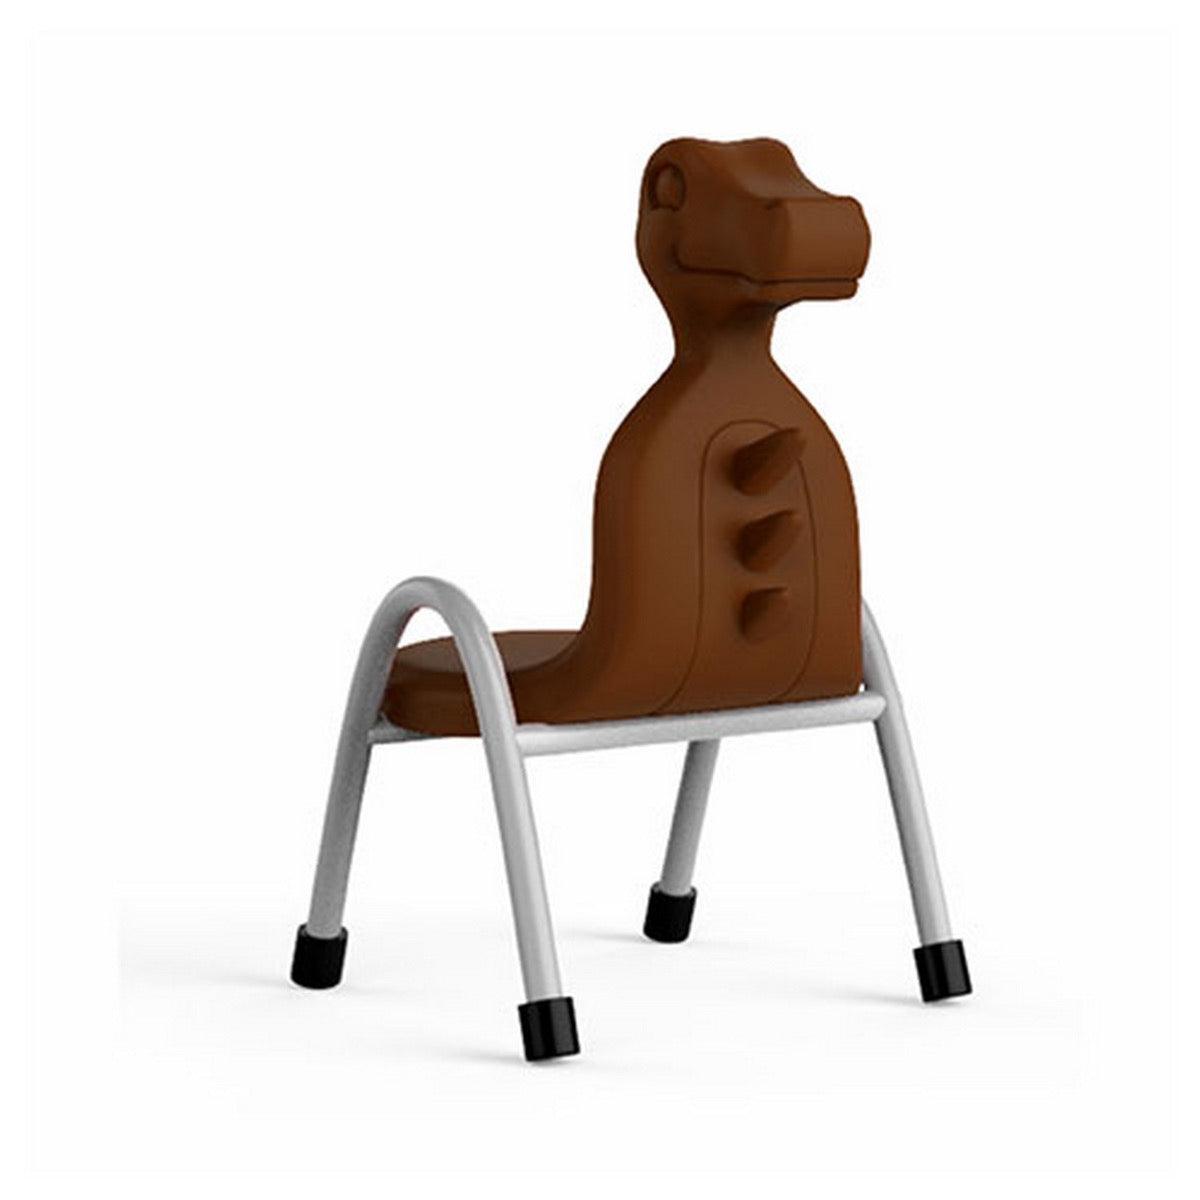 Ok Play Dino Chair, Study Chair, Sturdy And Durable Chair, Plastic Chair, Perfect For Home, Creches And School, Brown, 5 to 10 Years, Height 12 Inches